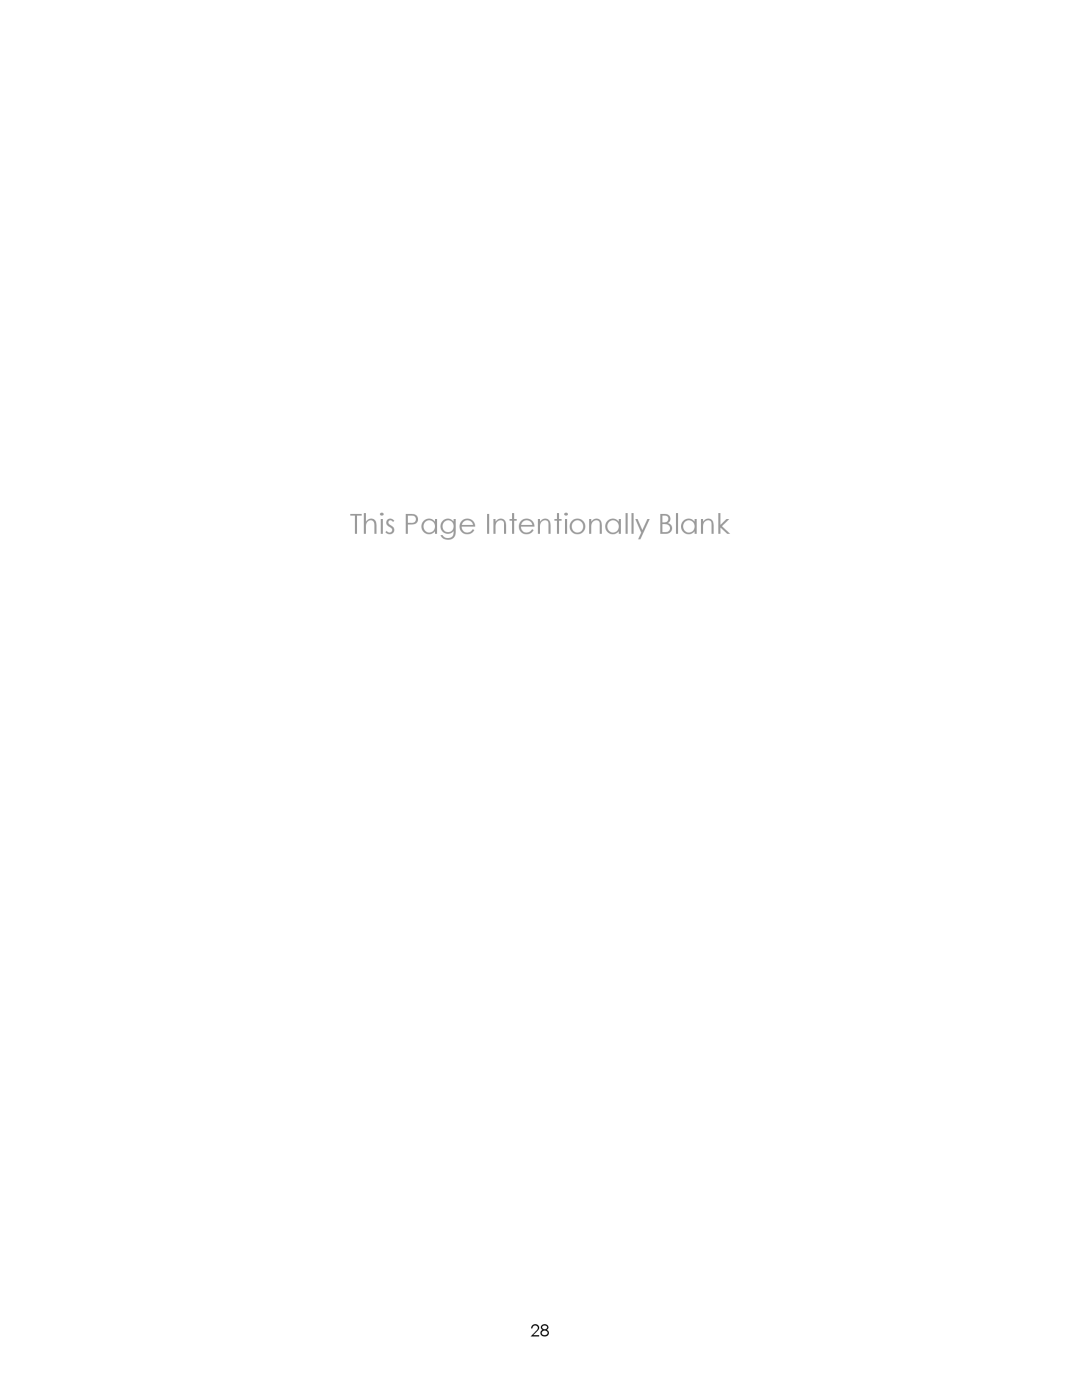 York Version 1.5.0 manual This Page Intentionally Blank 